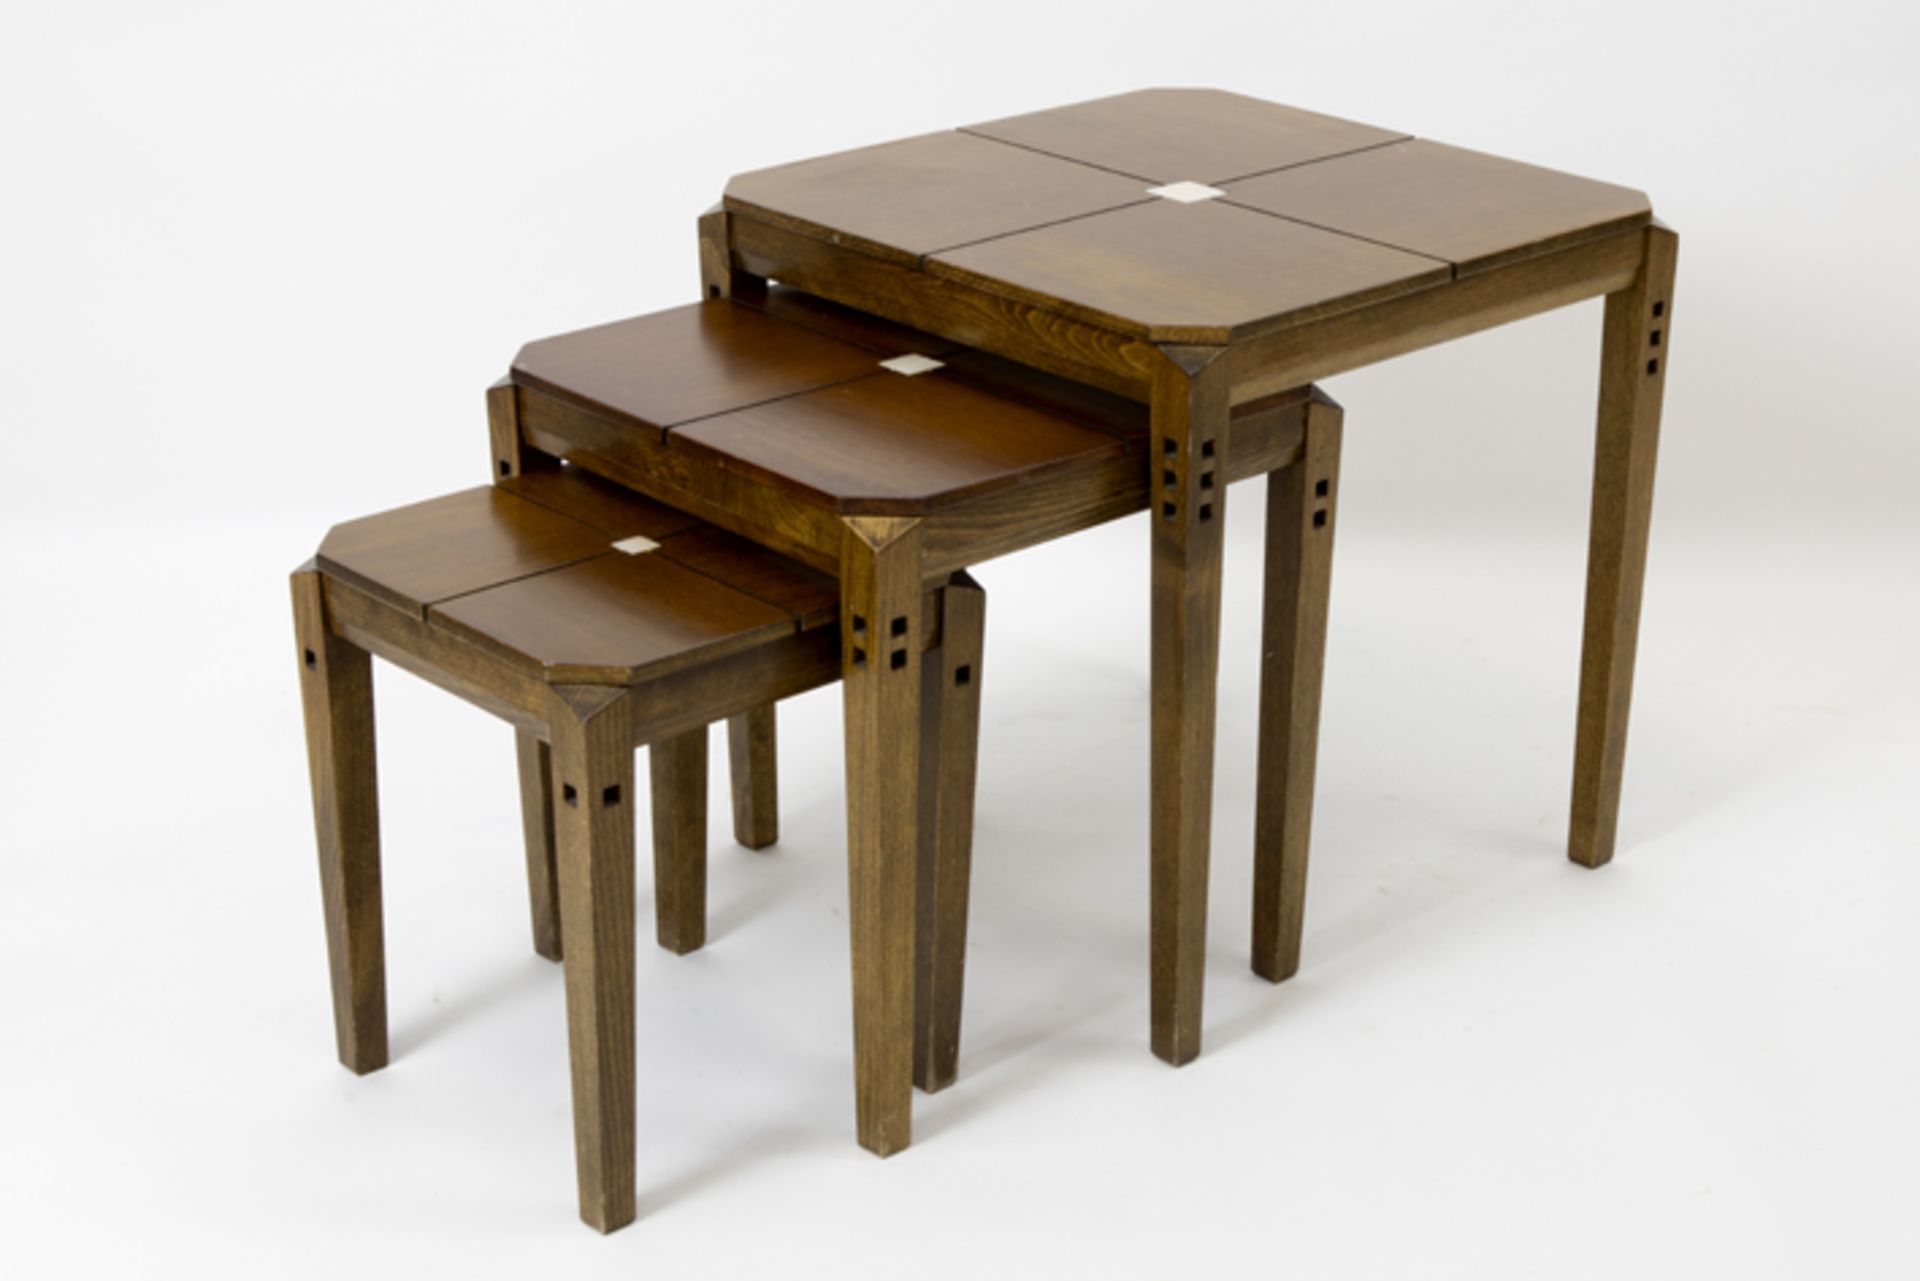 seventies' Umberto Asnago design nest of tables realised by Giorgetti ASNAGO UMBERTO (° 1949) voor